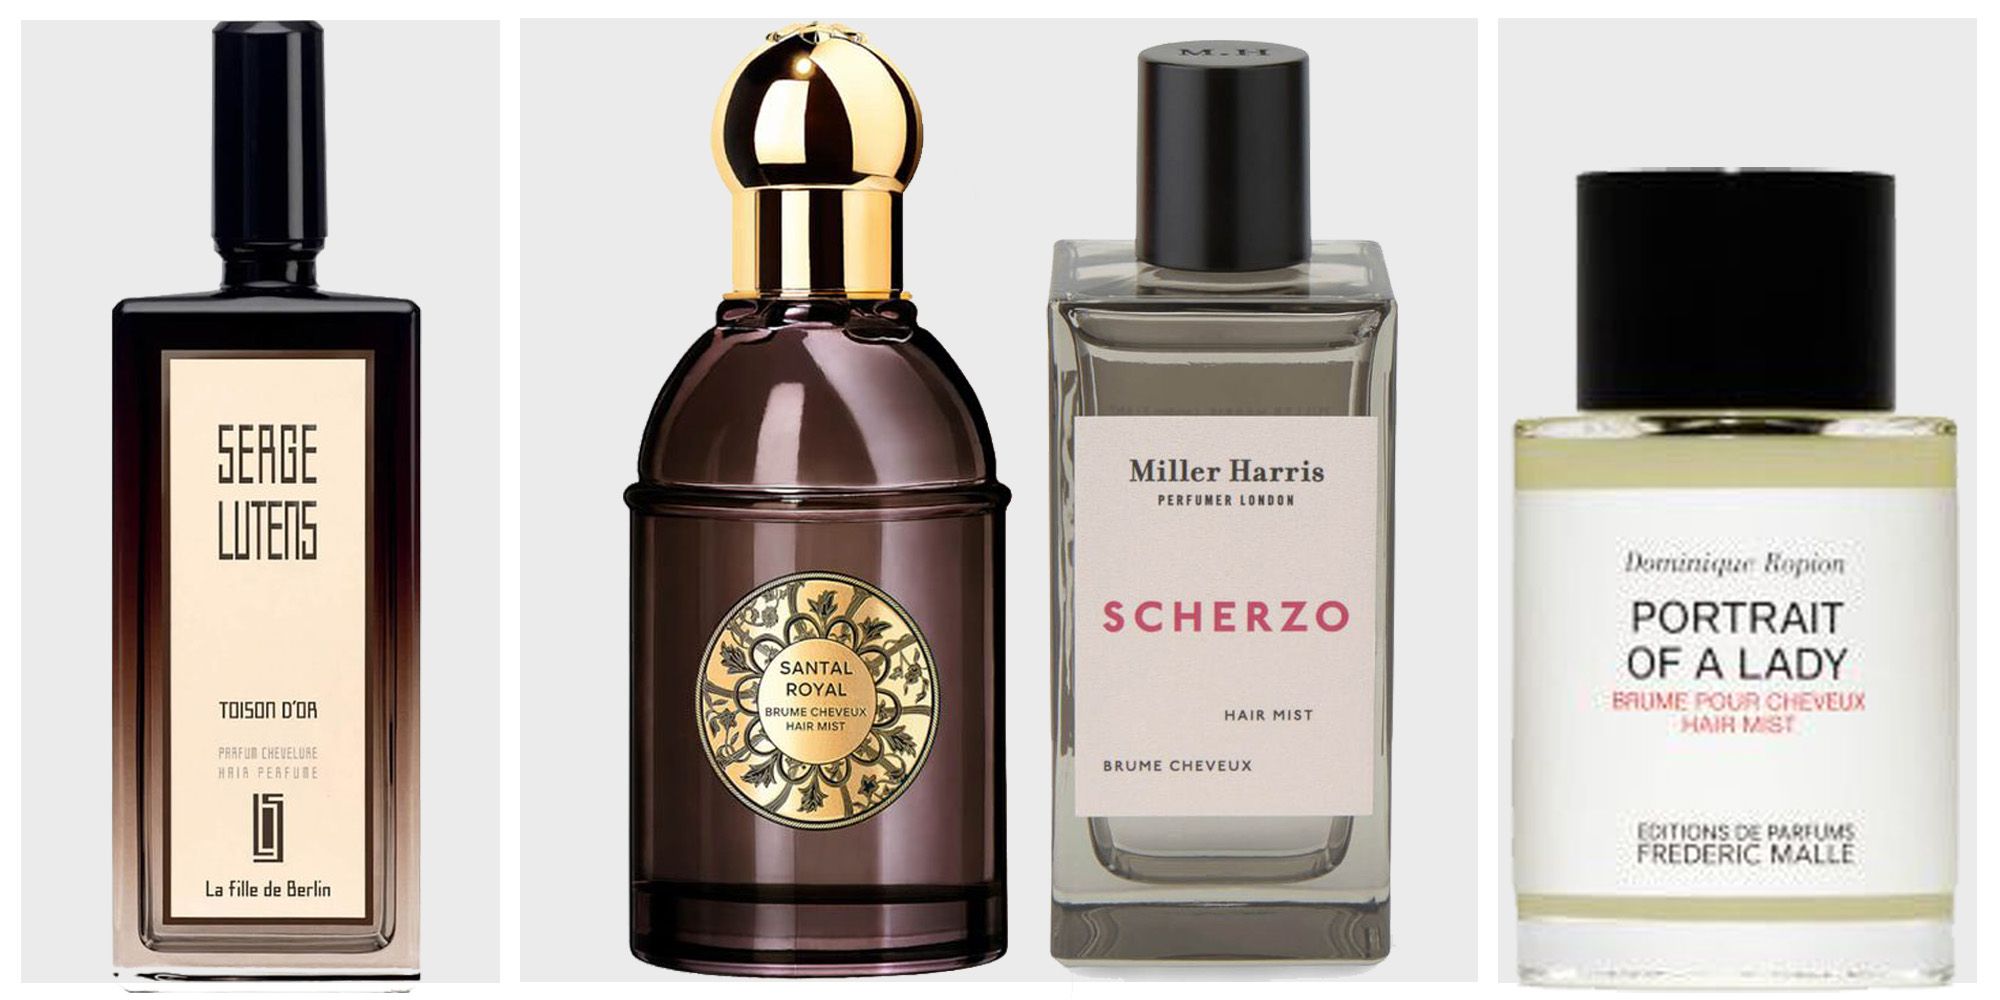 21 of the best modern oud perfumes